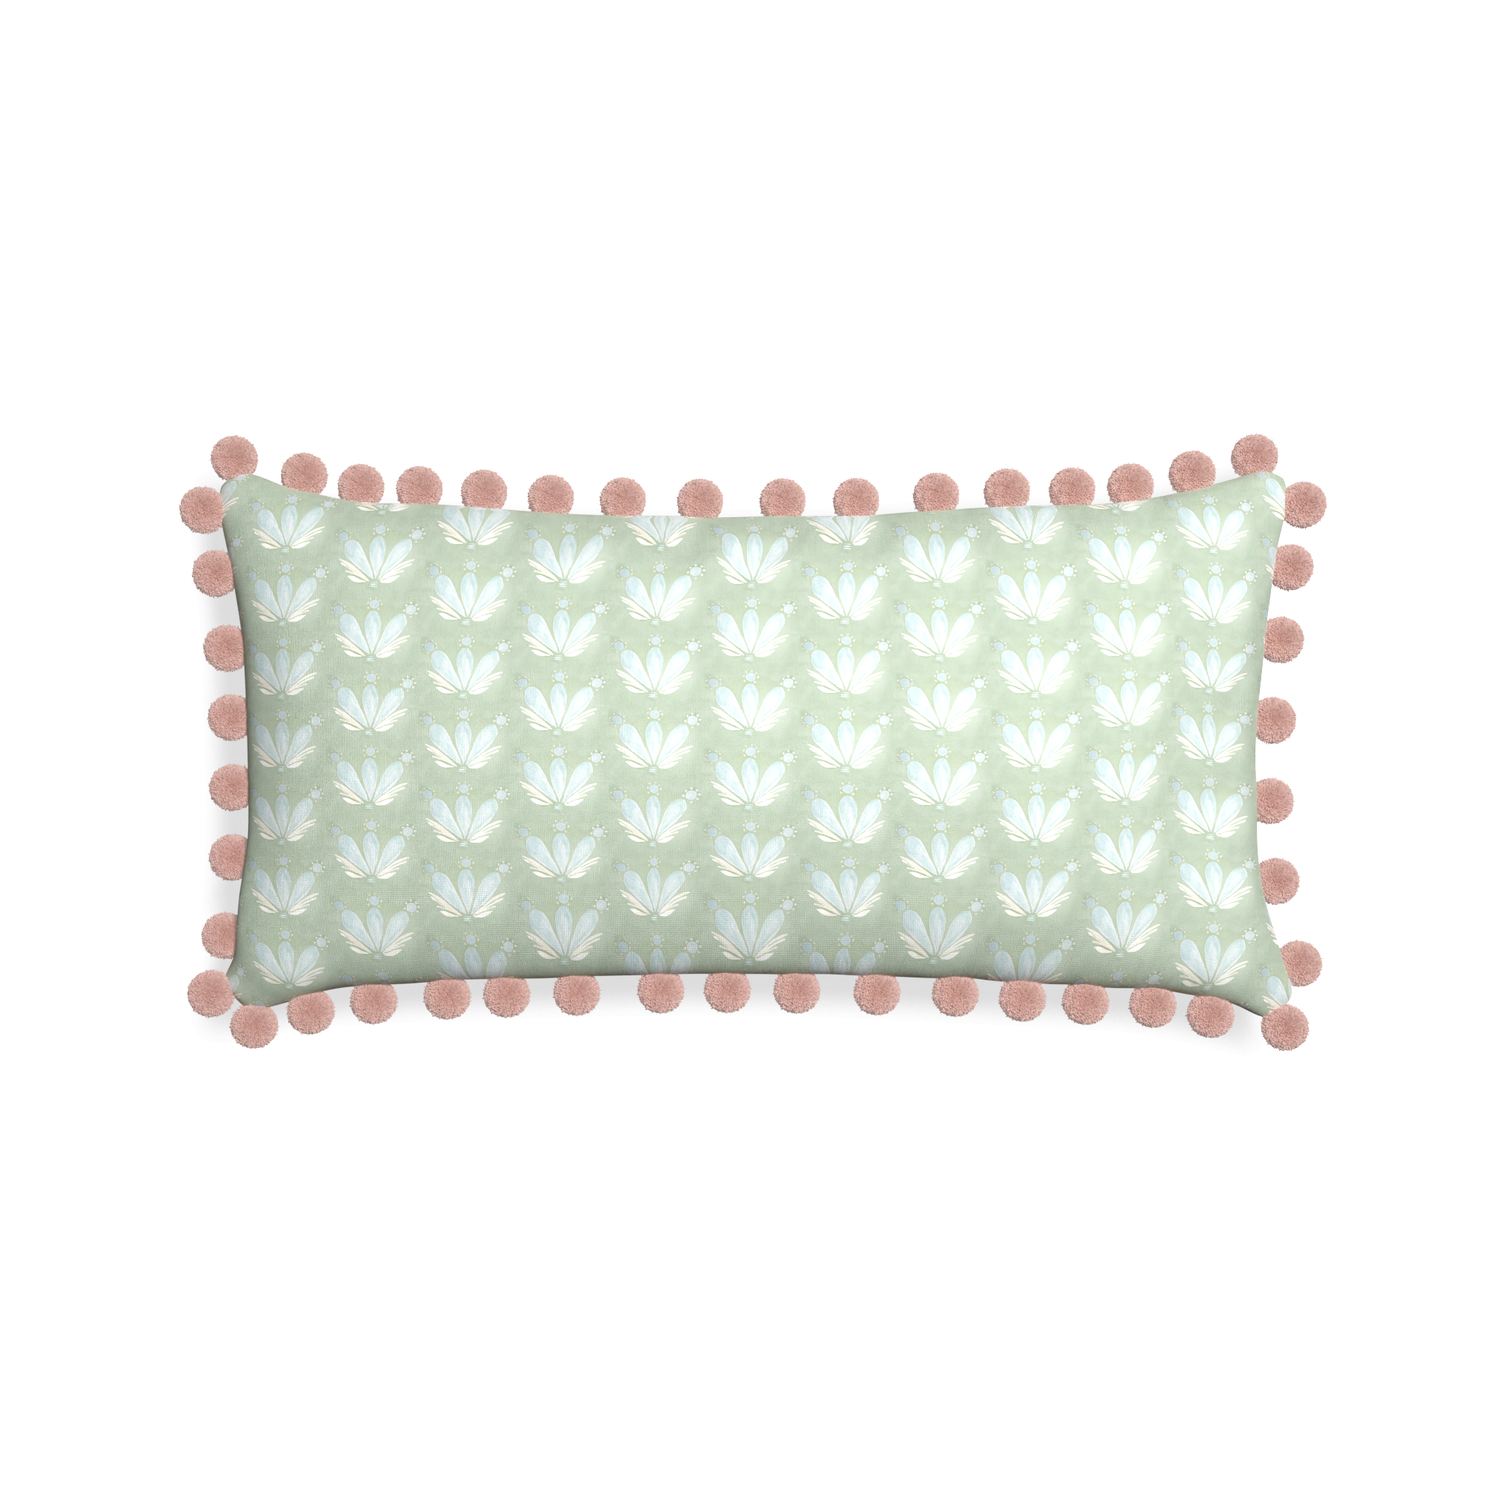 Midi-lumbar serena sea salt custom blue & green floral drop repeatpillow with rose pom pom on white background